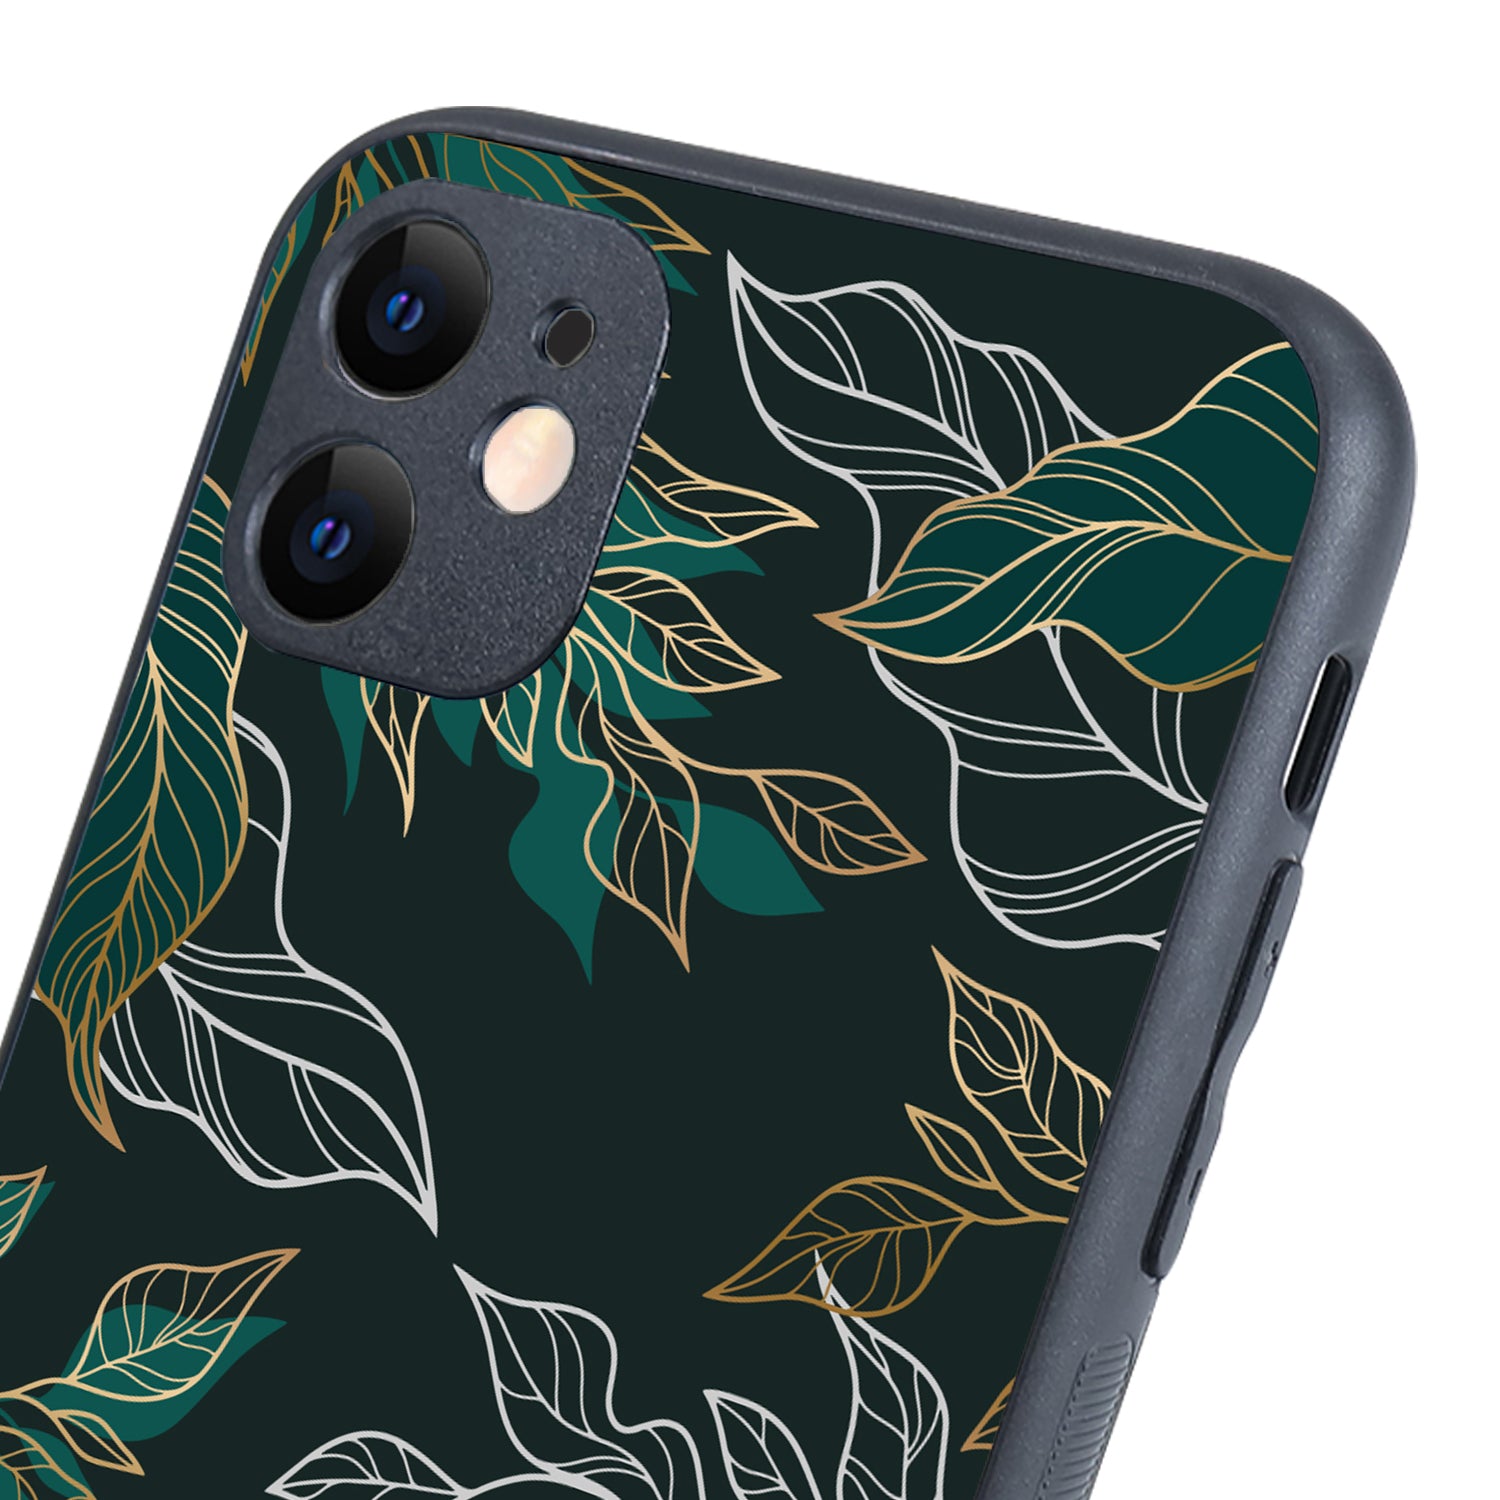 Green Floral iPhone 11 Case